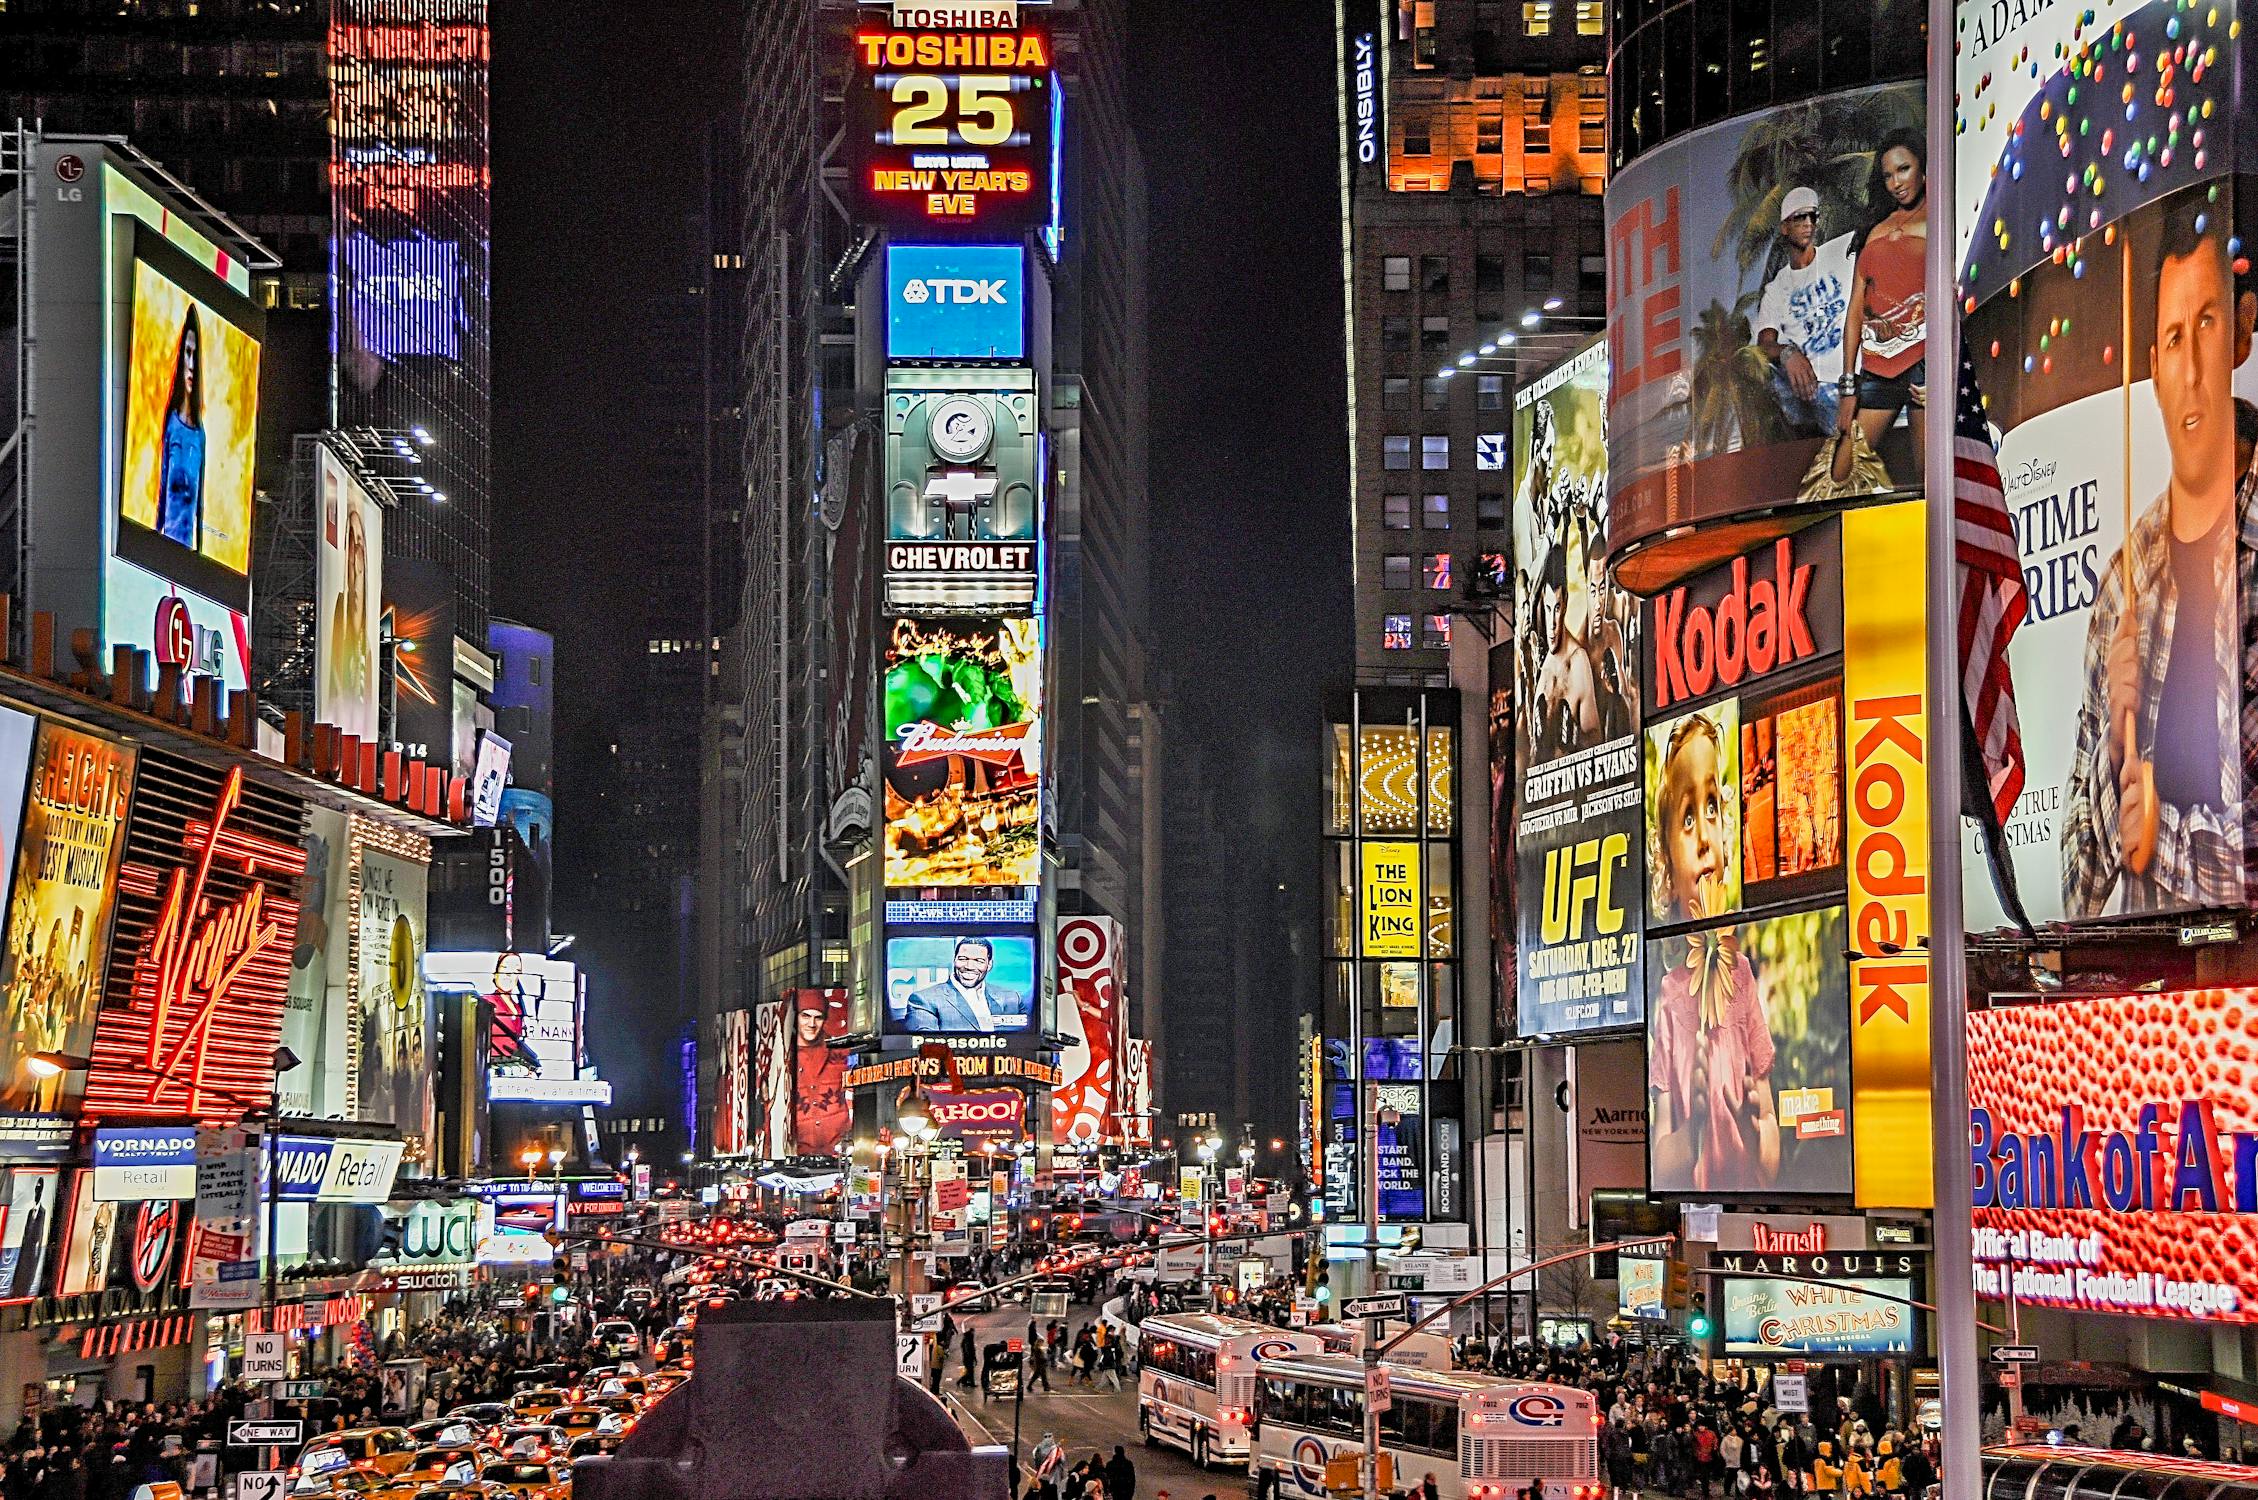 Busy time square at night with dozens of advertising boards